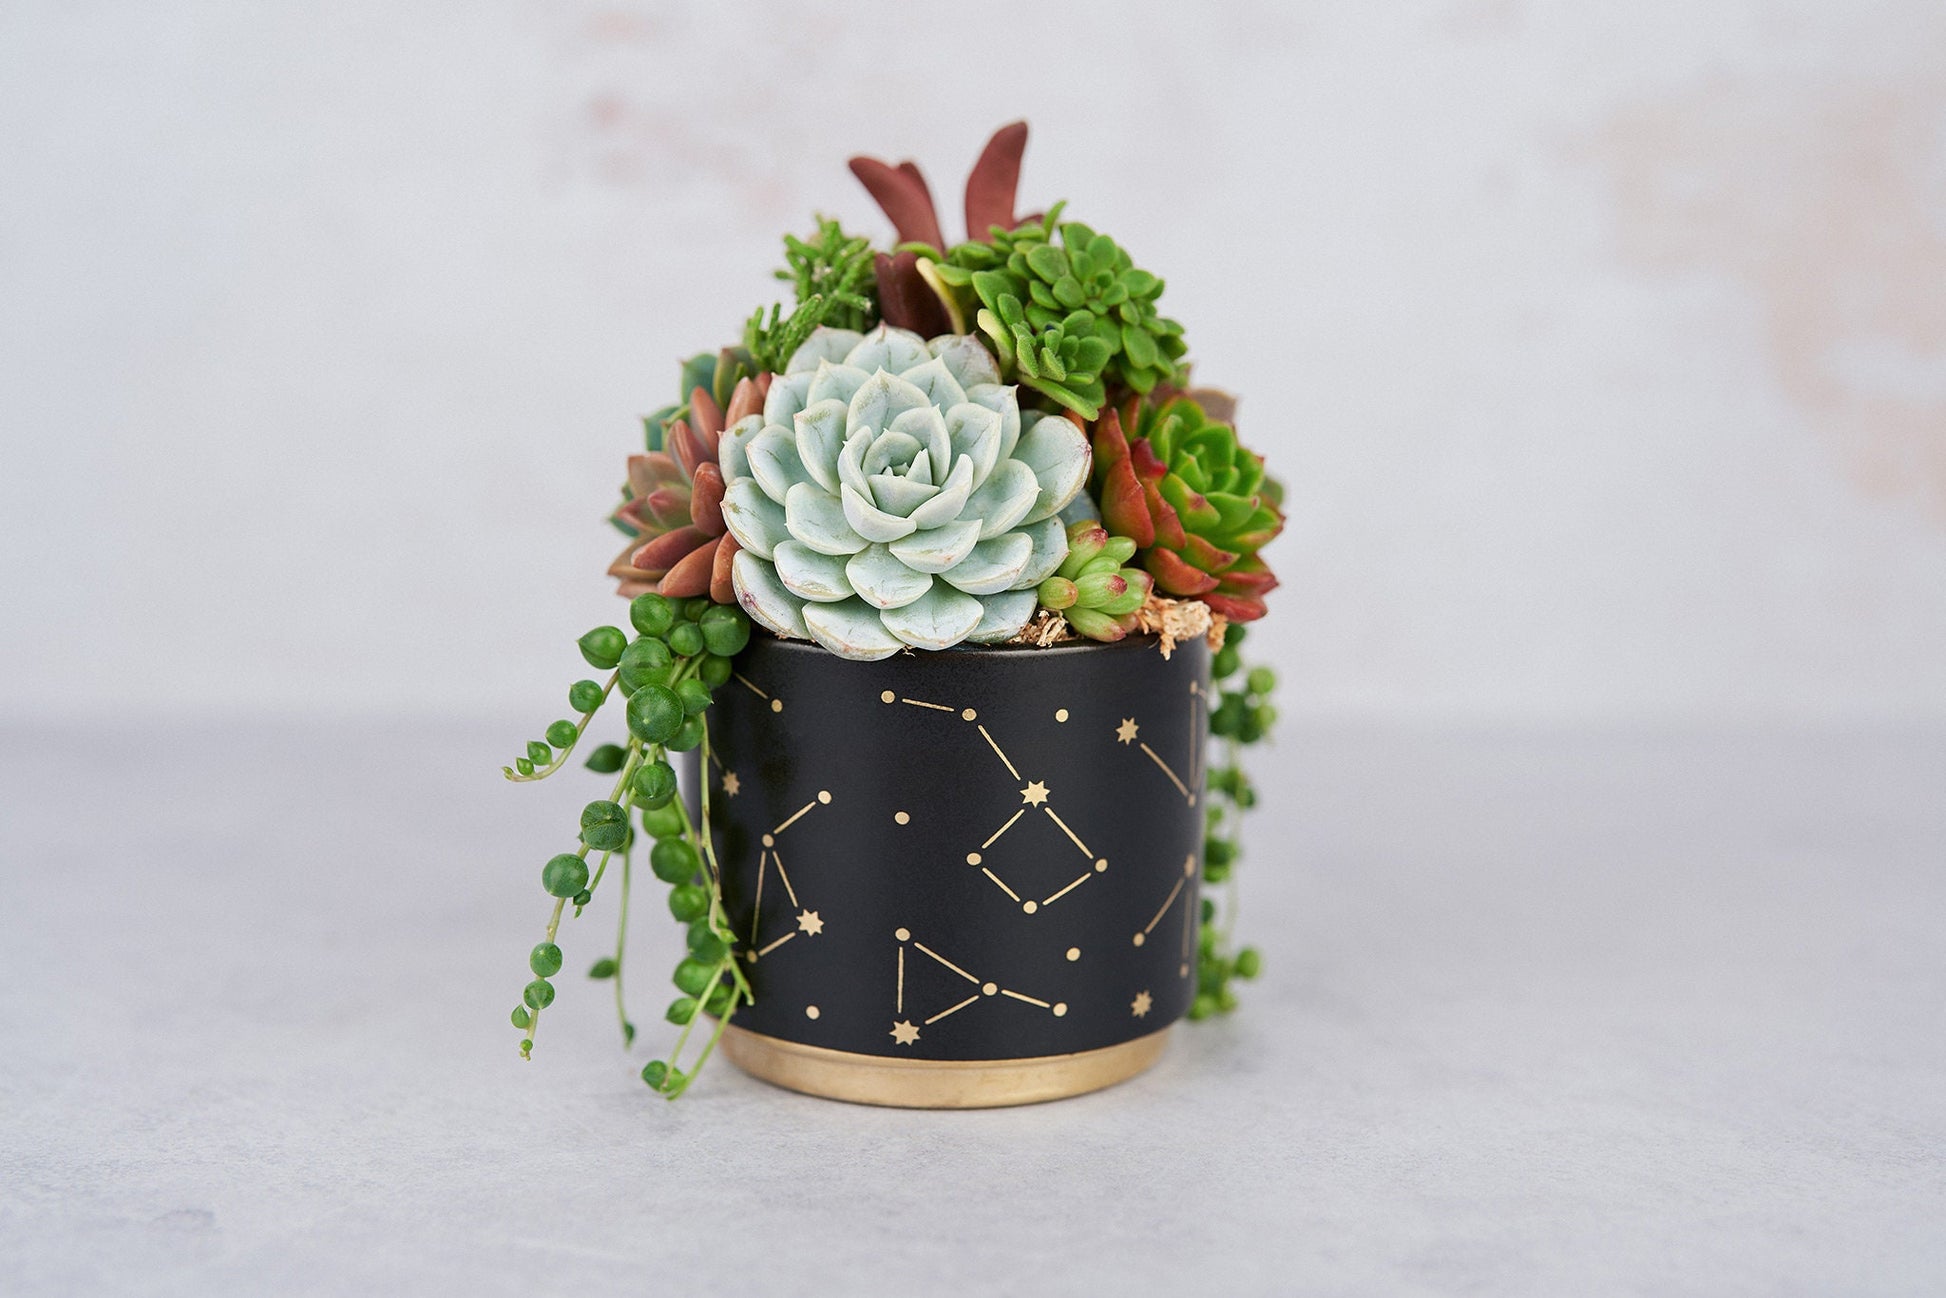 My Universe Living Succulent Arrangement Gift | Birthday, Celebration, House Warming Living Gift for Plant Lovers | Gift for Mom